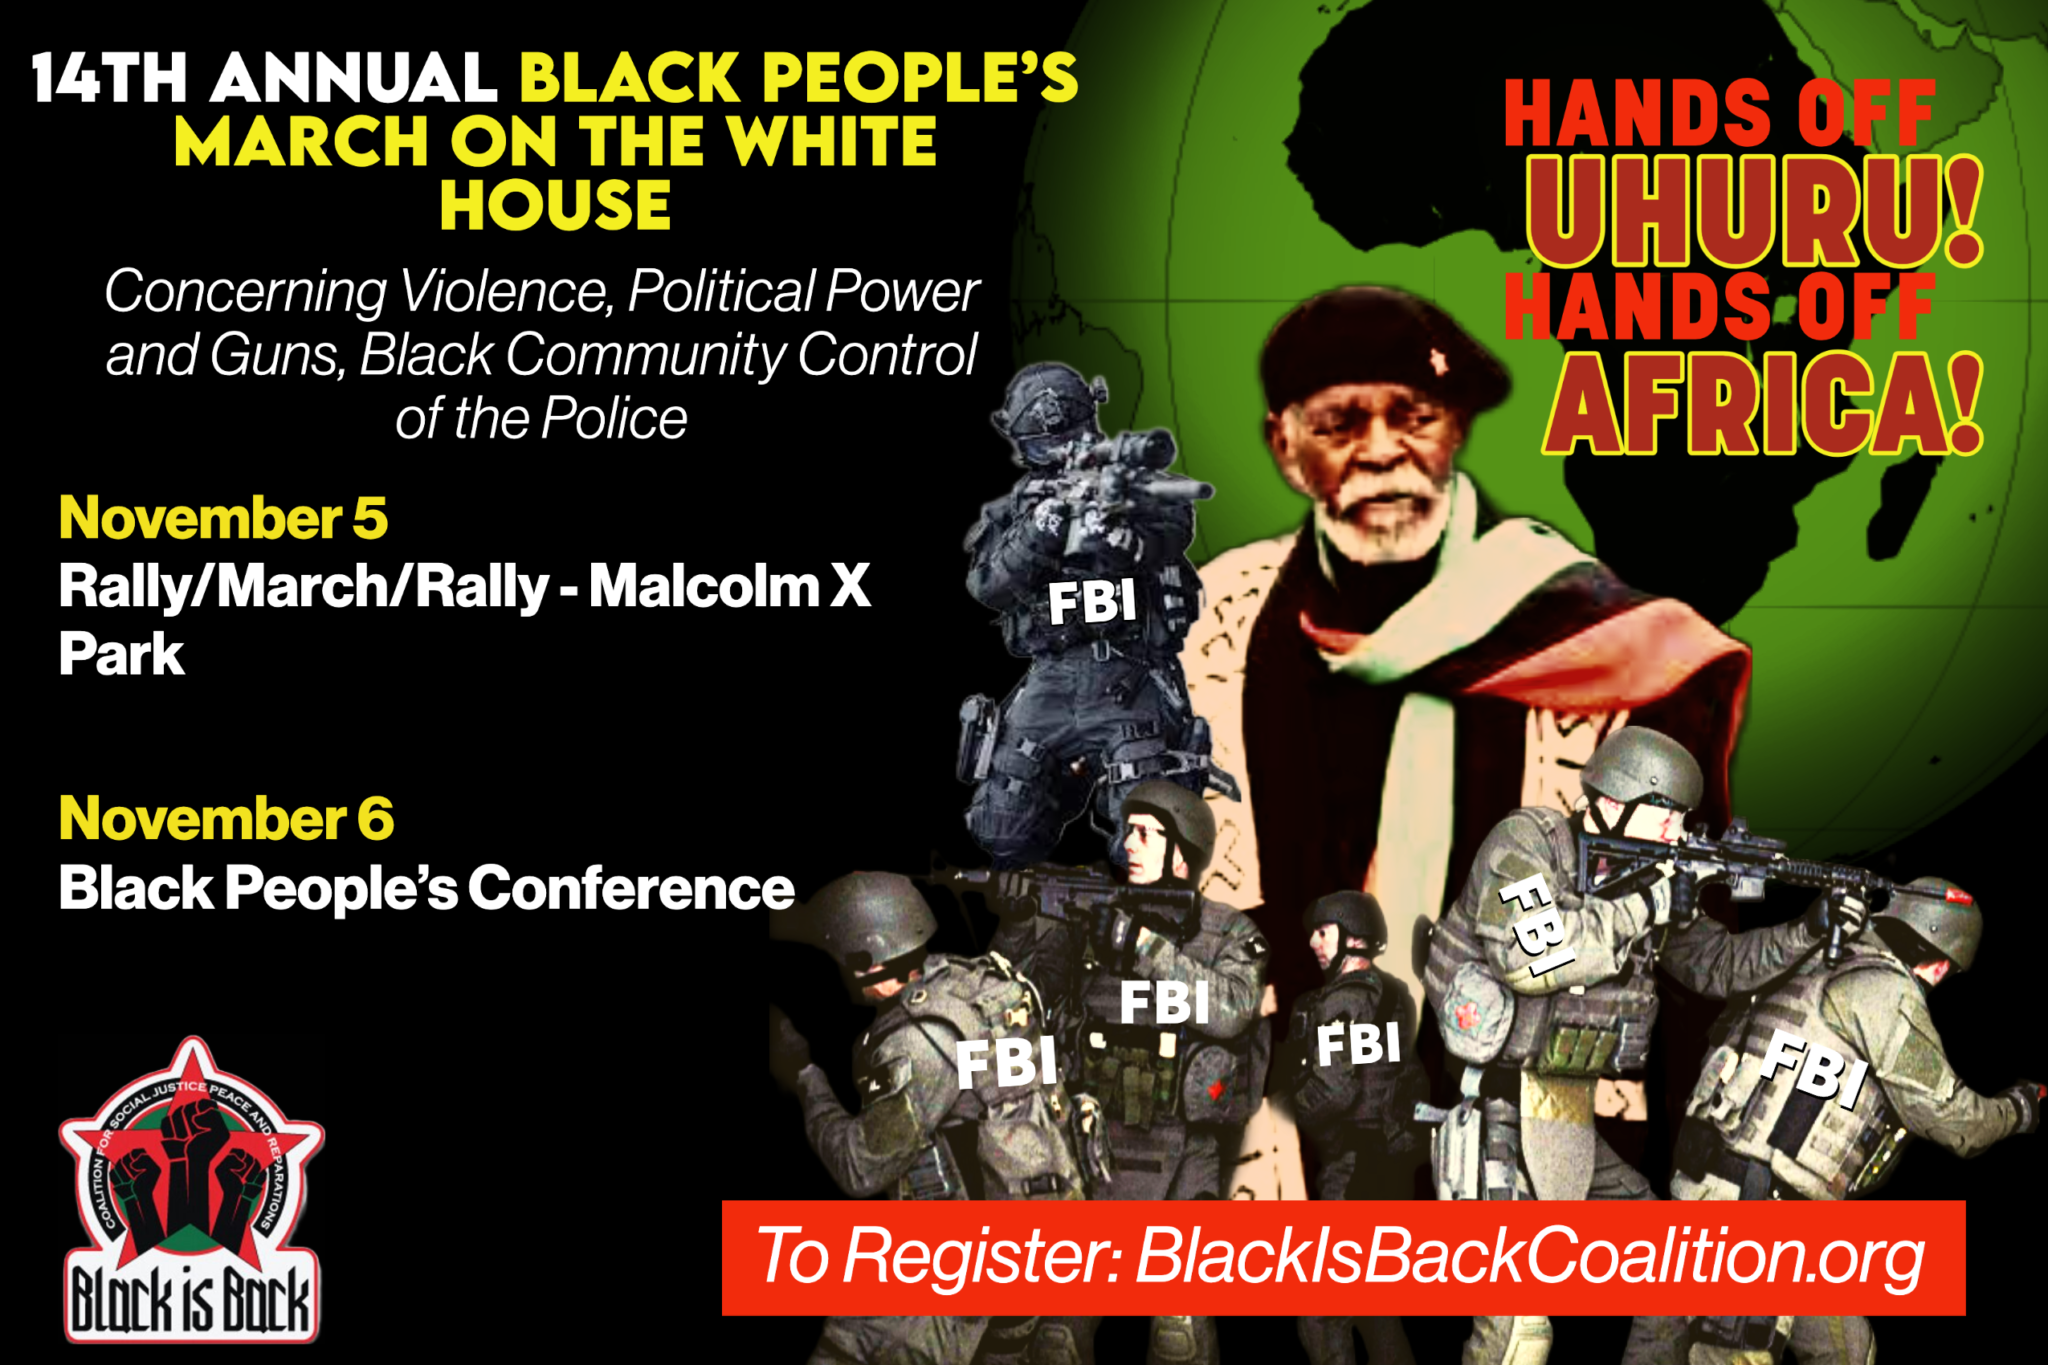 Black is Back Coalition Says Hands Off the African Liberation Movement